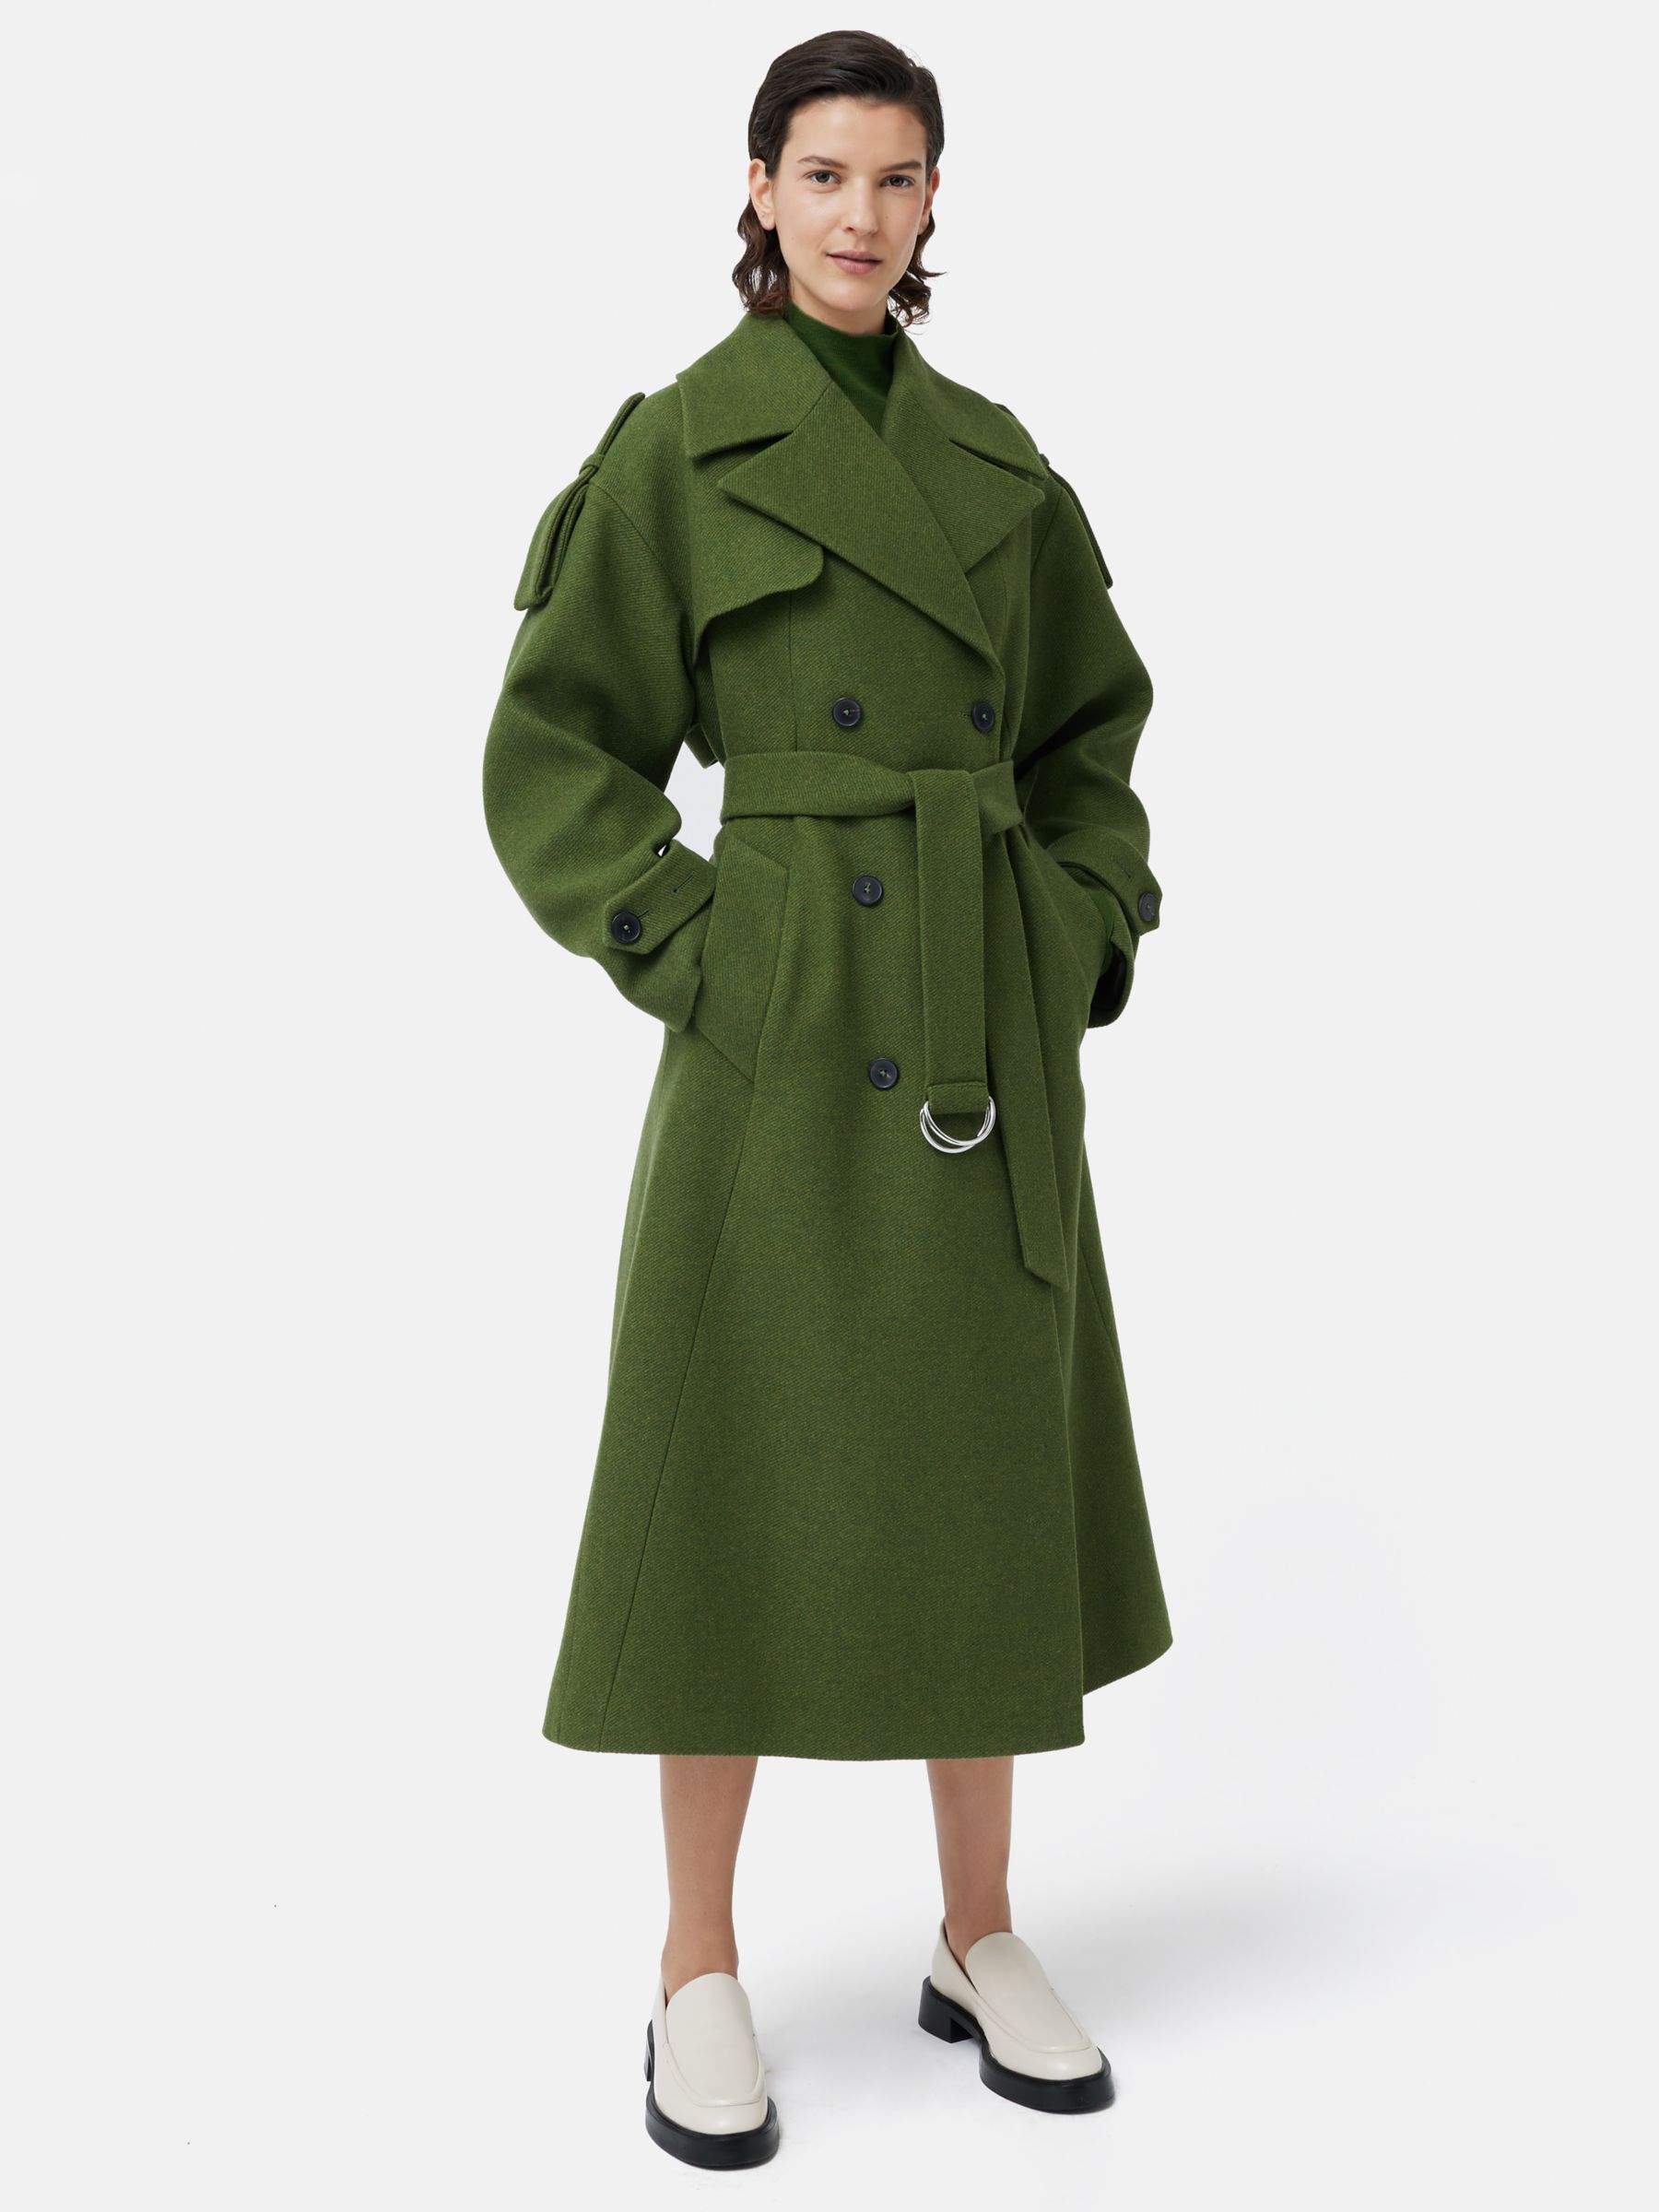 Buy Jigsaw Nelson Italian Twill Wool Blend Trench Coat Online at johnlewis.com